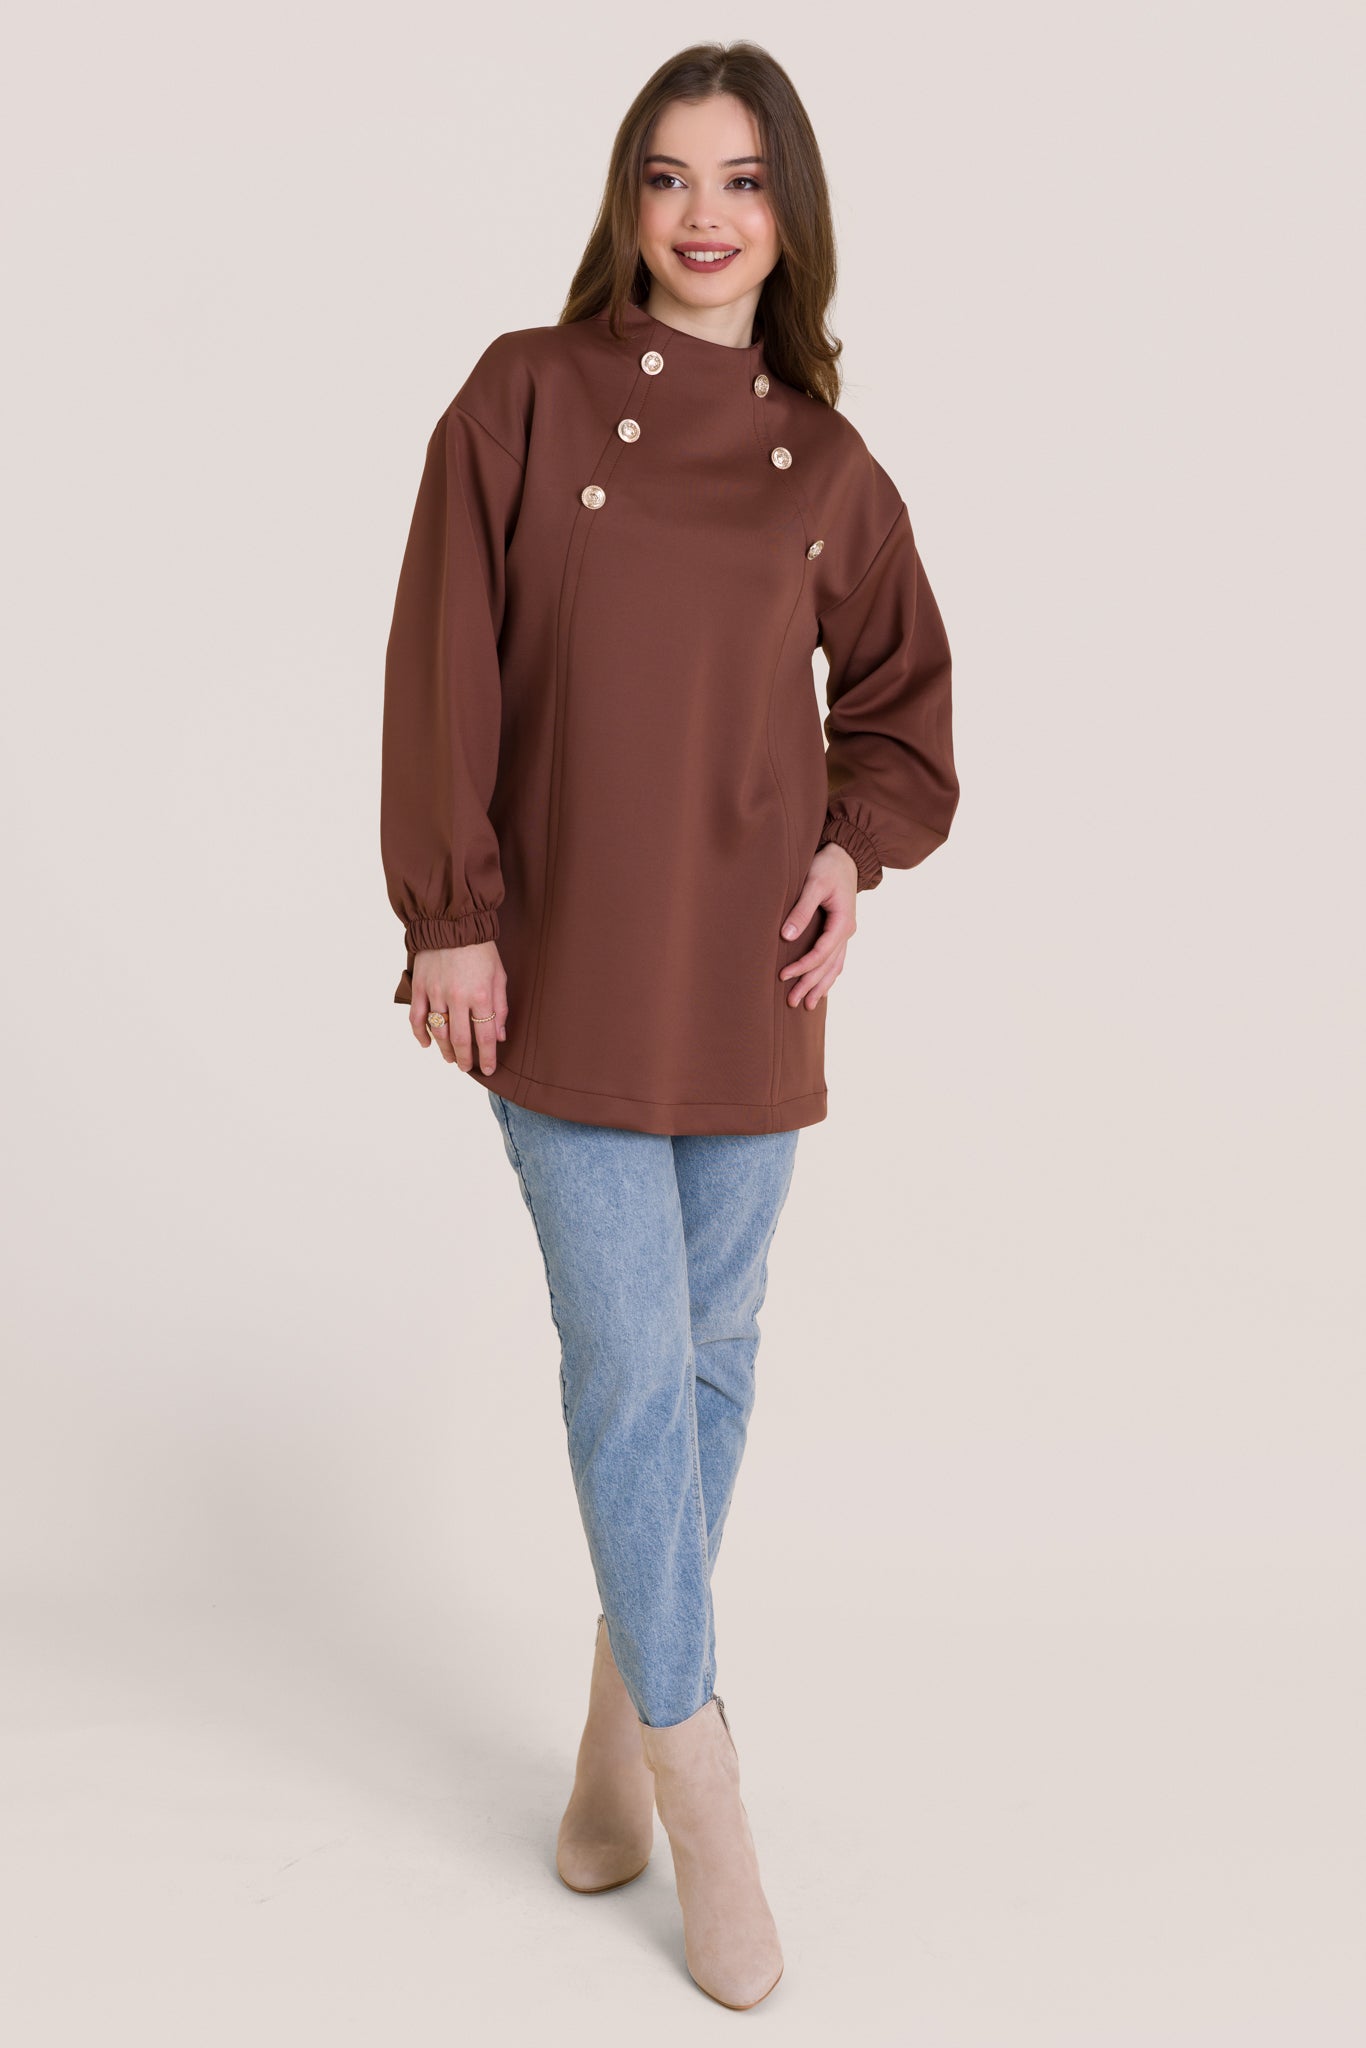 Long Sleeves Golden Button Sweater-Espresso